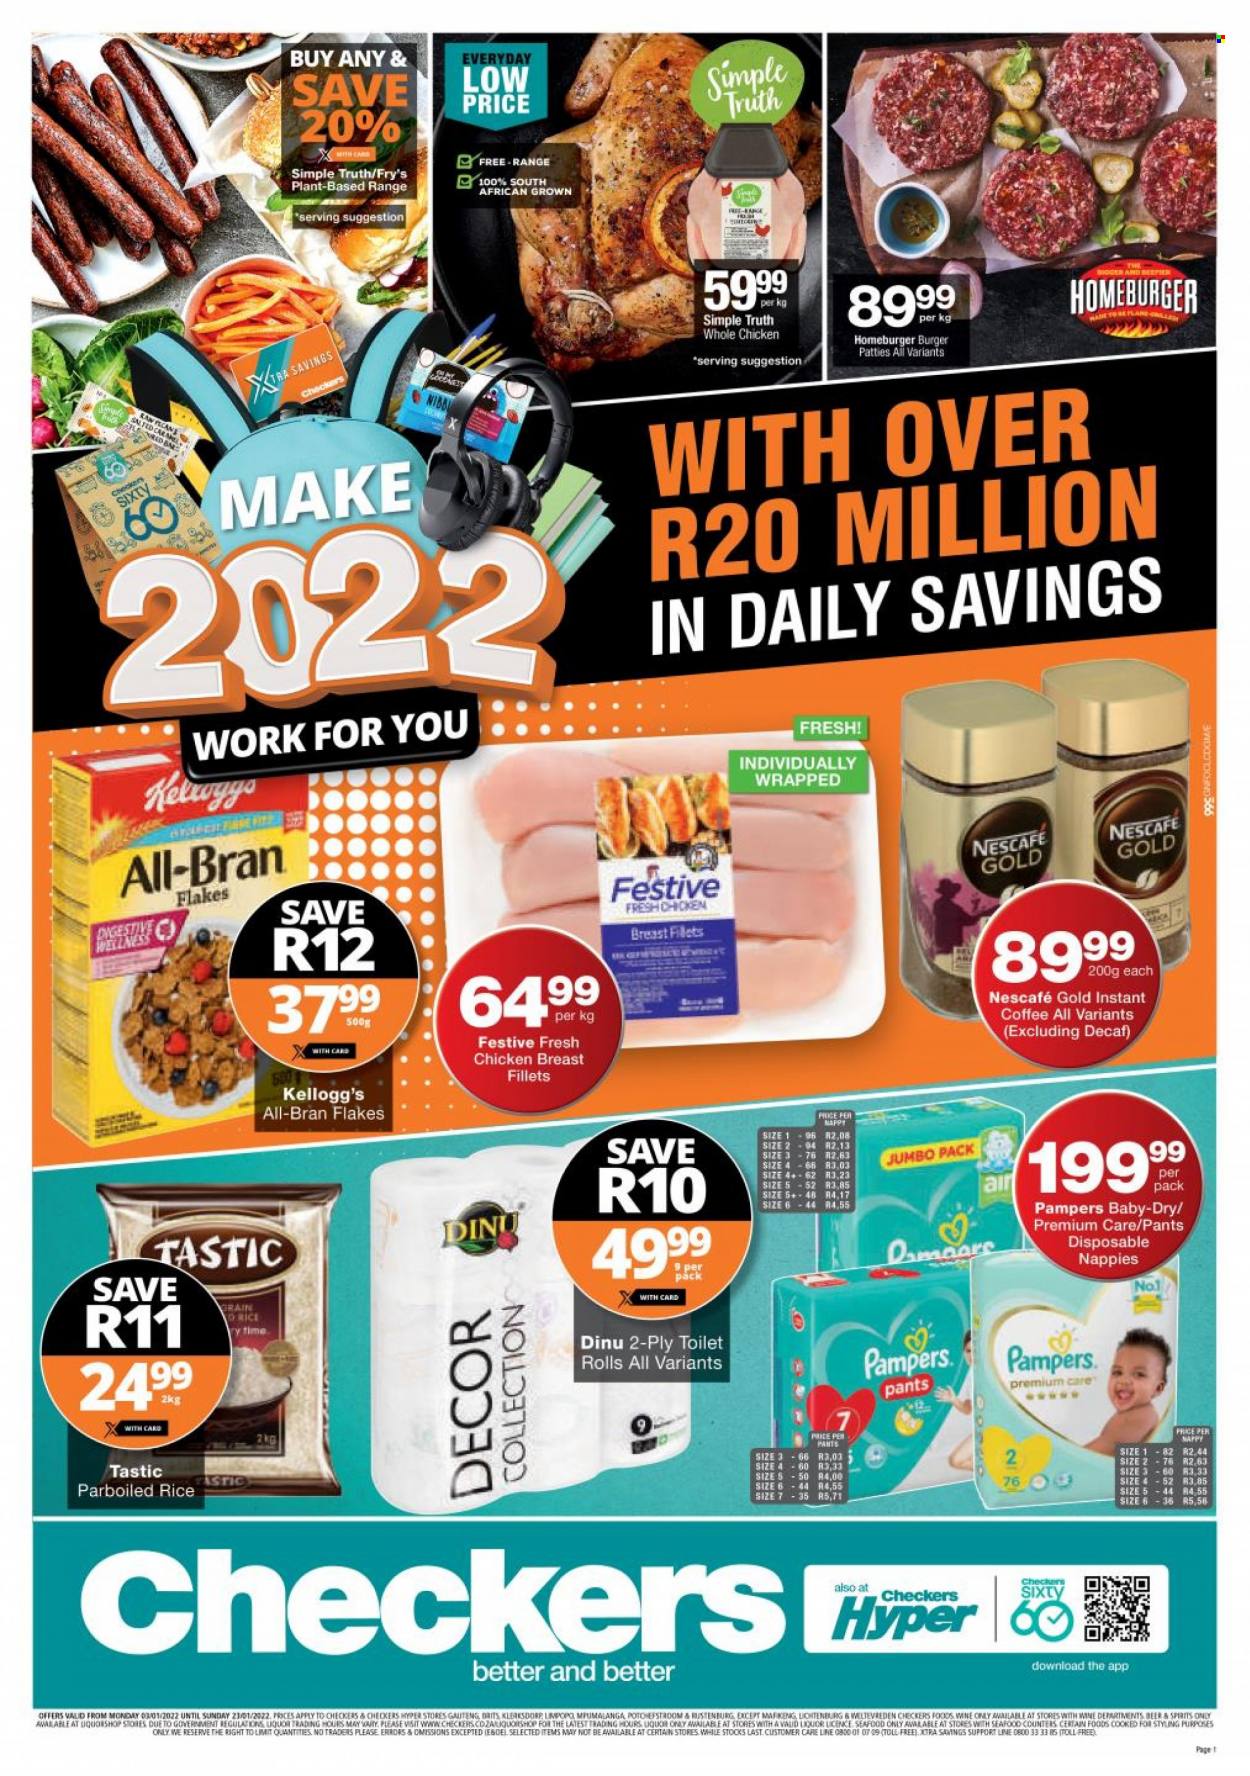 Checkers catalogue  - 03/01/2022 - 23/01/2022 - Sales products - seafood, hamburger, Kellogg's, bran flakes, All-Bran, rice, parboiled rice, Tastic, instant coffee, Nescafé, wine, liquor, beer, whole chicken, chicken breasts, chicken meat, burger patties, Pampers, pants, nappies, toilet paper, XTRA. Page 1.